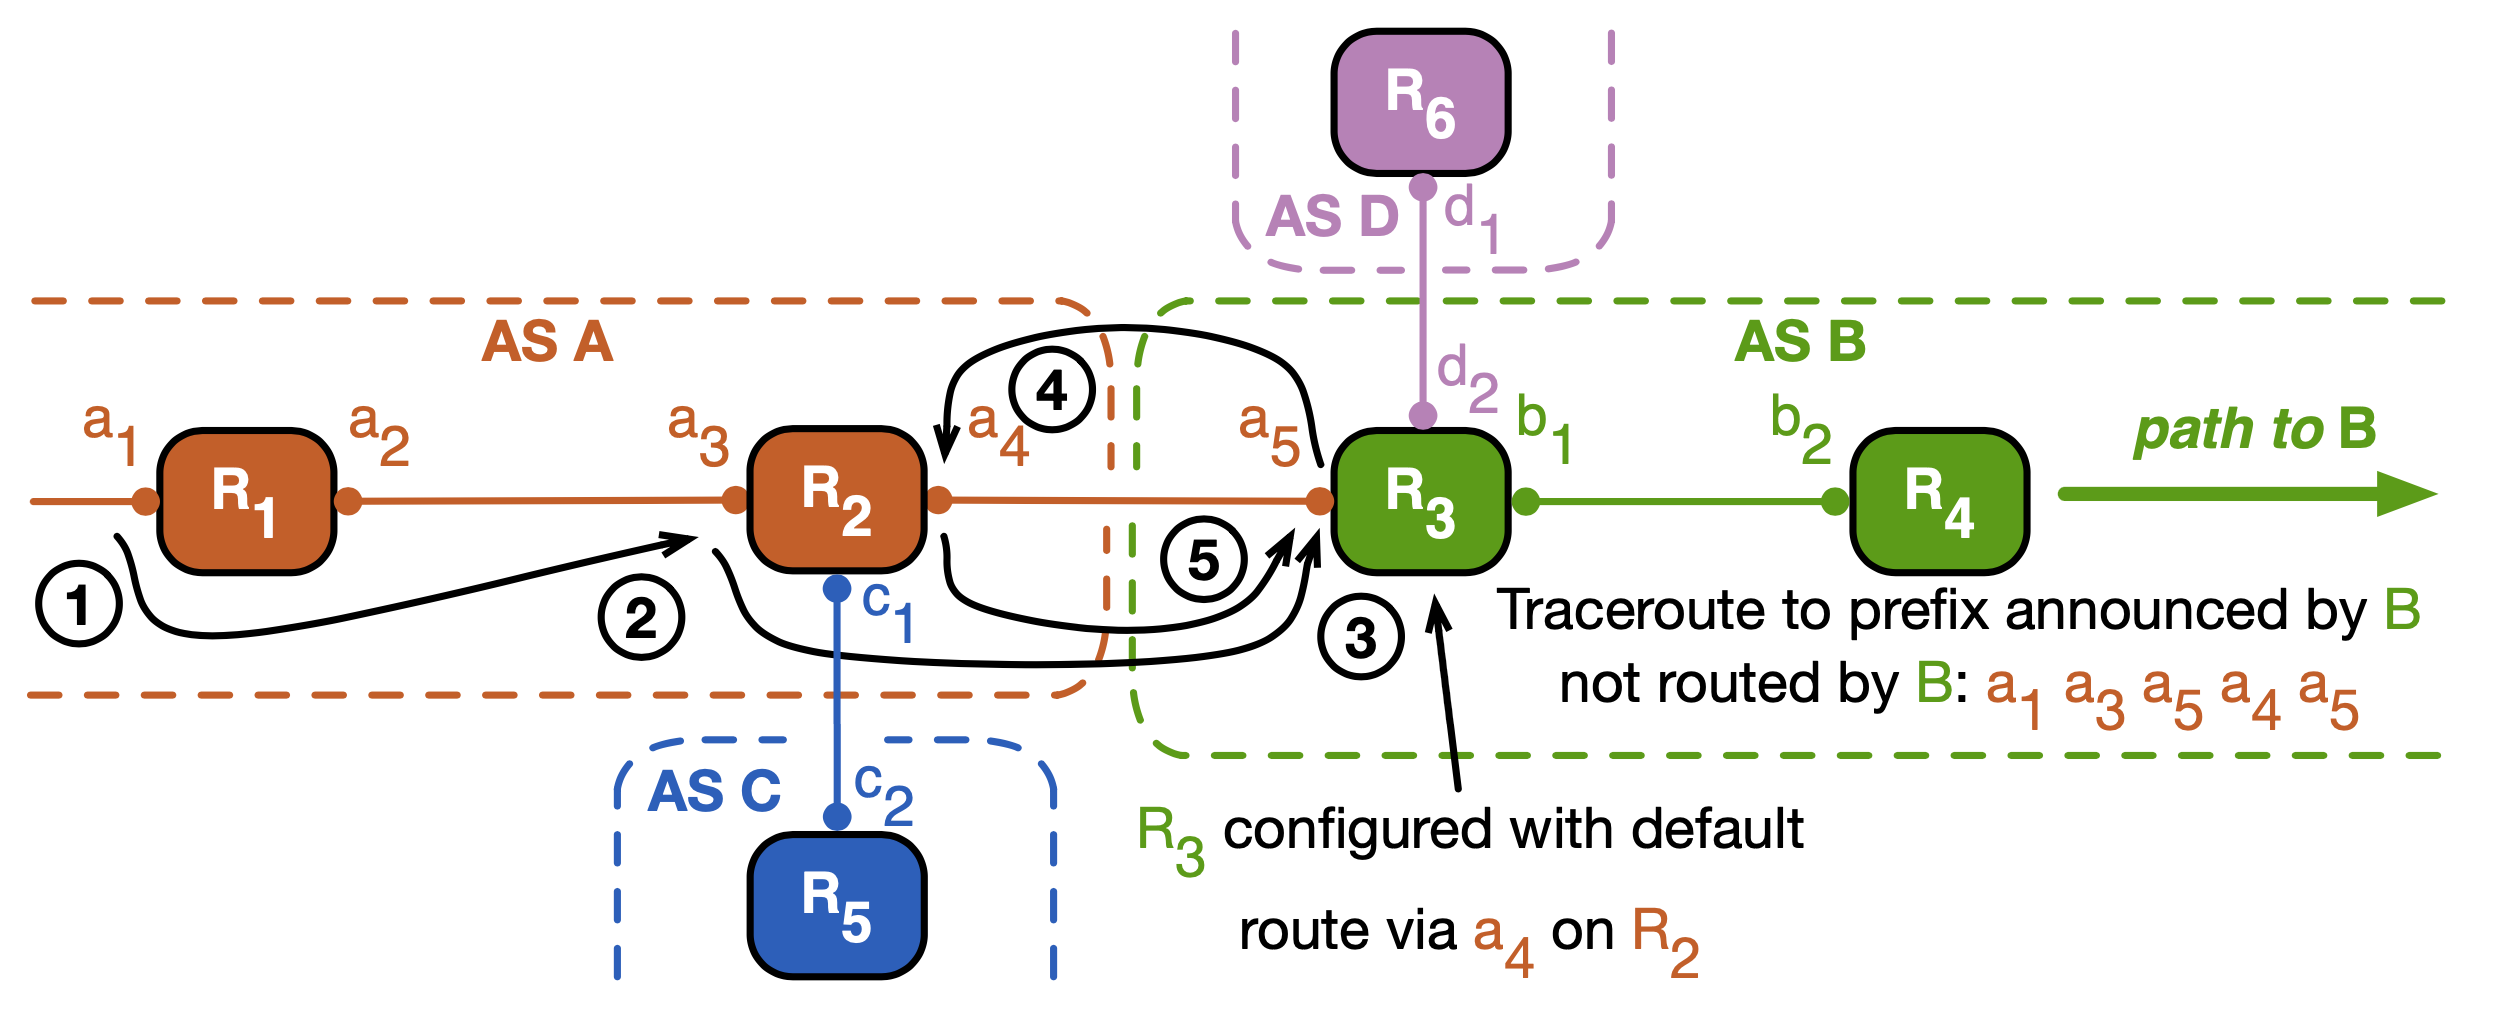 Figure 4 — A simple loop between AS A and its customer B implying the absence of filtering by A at R2. R2 should discard packet 4 because it arrives with a source address outside of B's network, rather than send it back to B.